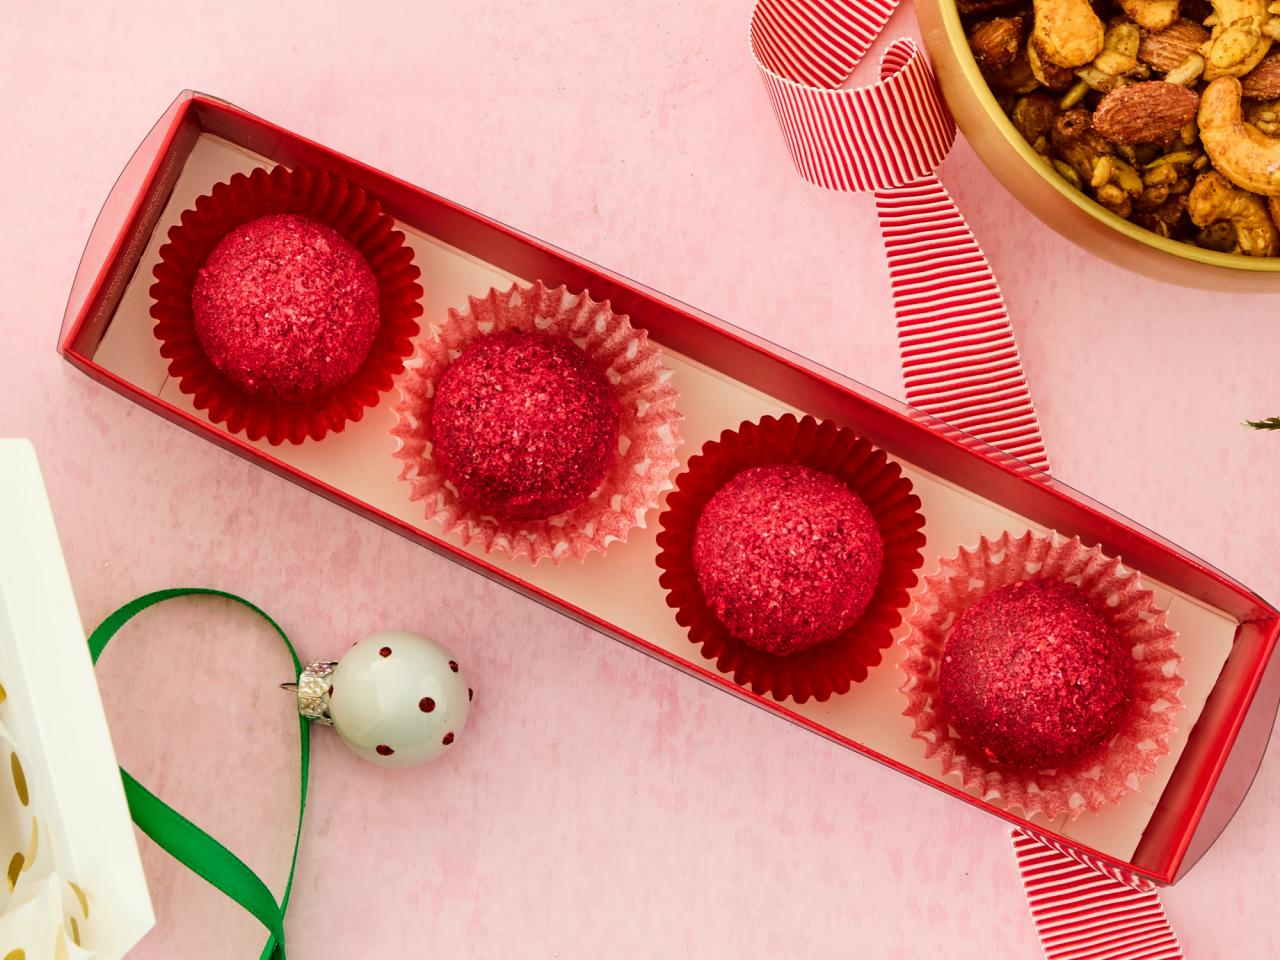 25 Gifts for Co-Workers, Food Network Gift Ideas